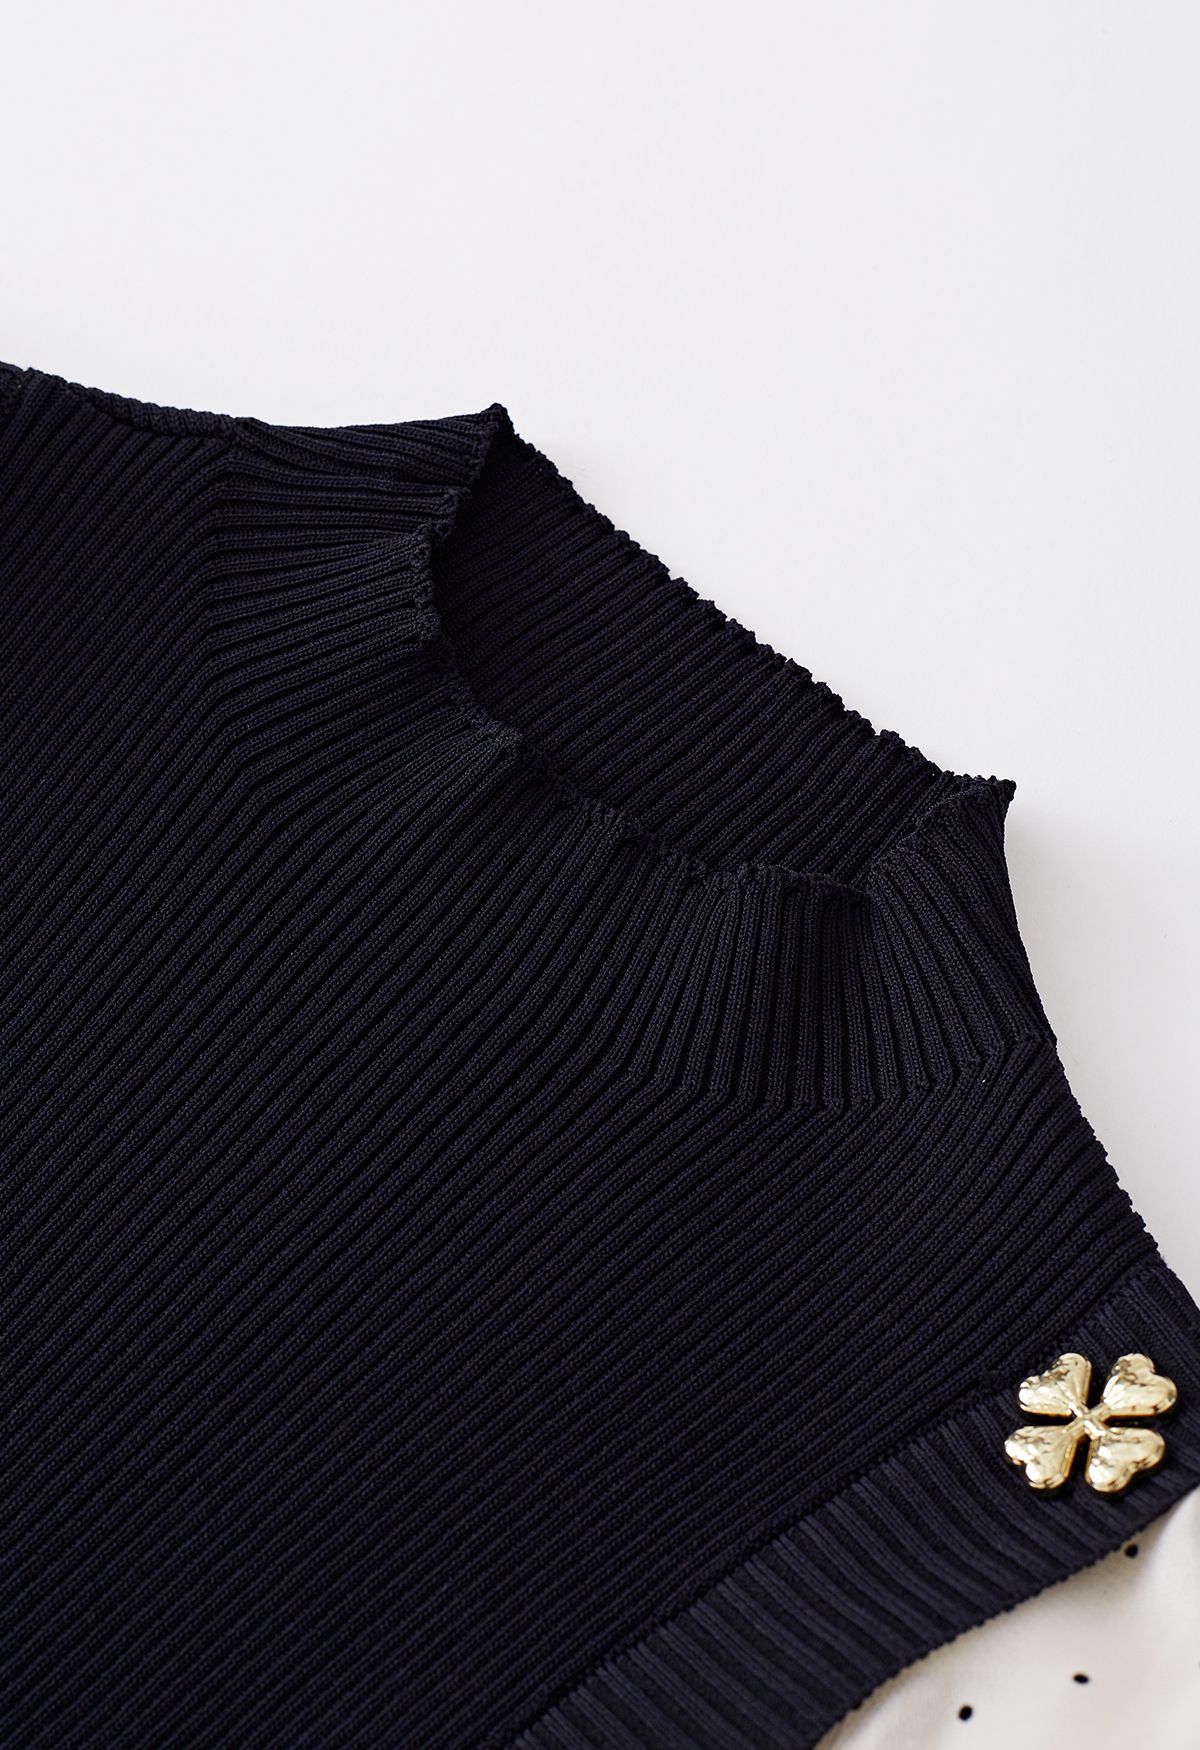 Spliced Dotted Sleeves Buttoned Knit Top in Black